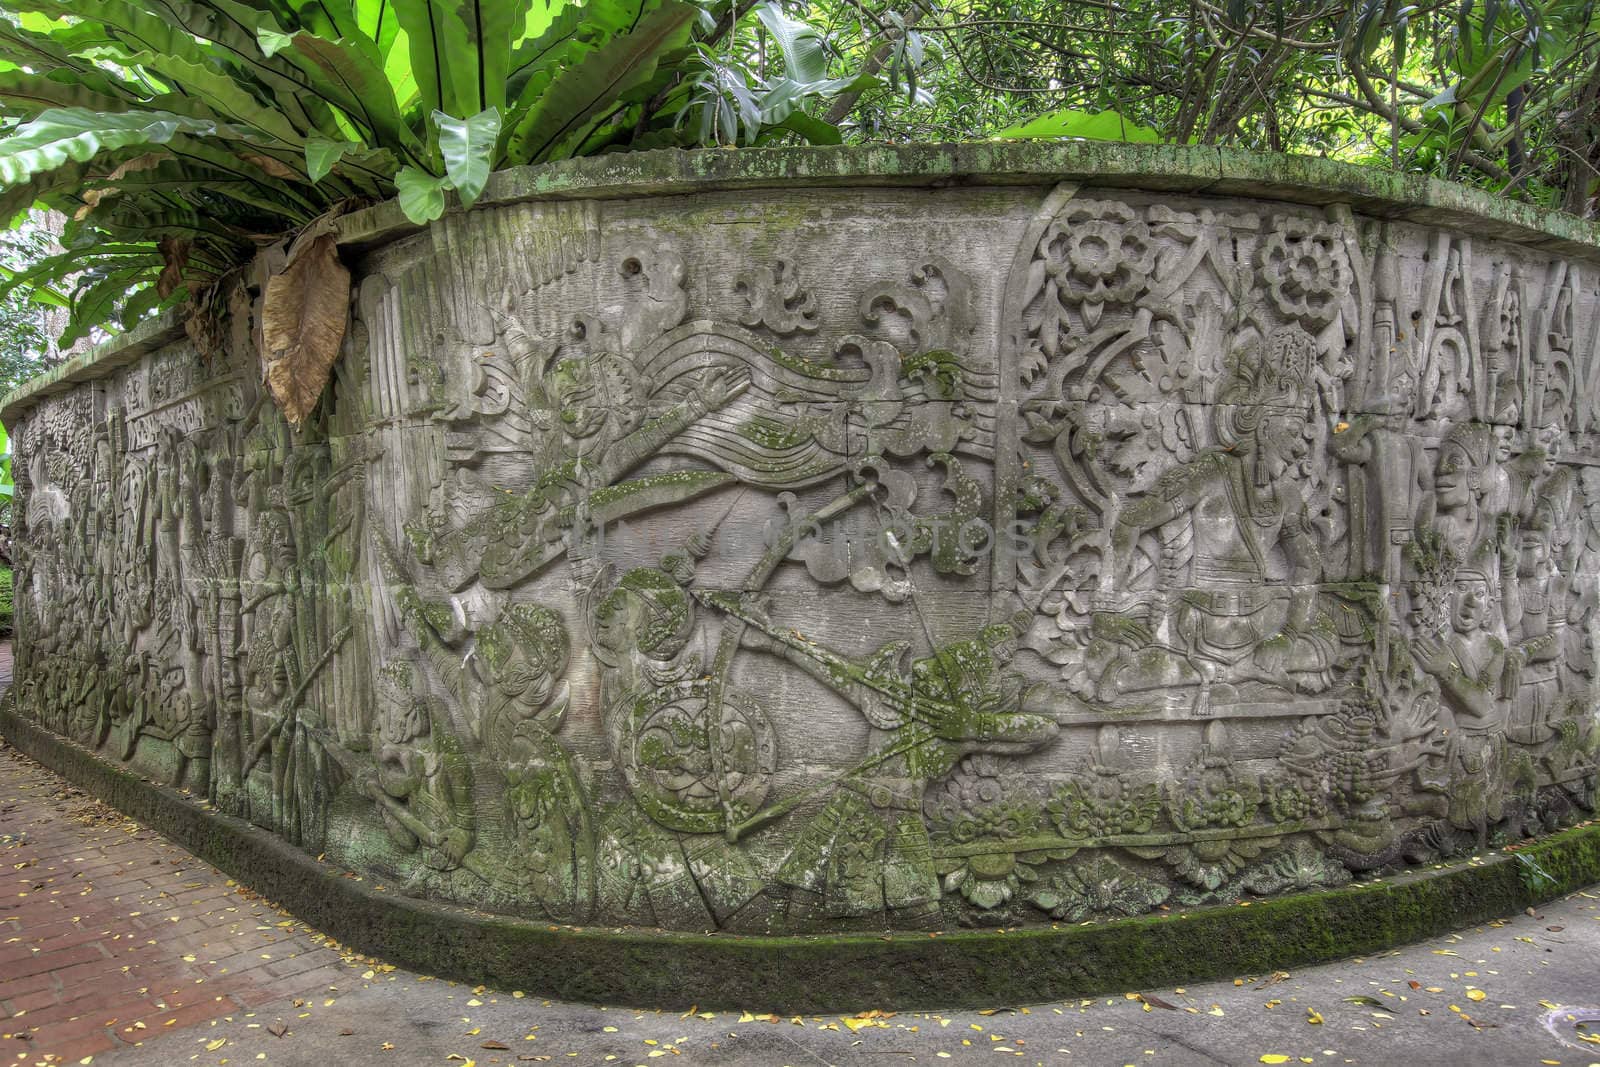 Balinese Stone Wall Carvings in Fort Canning Park Singapore